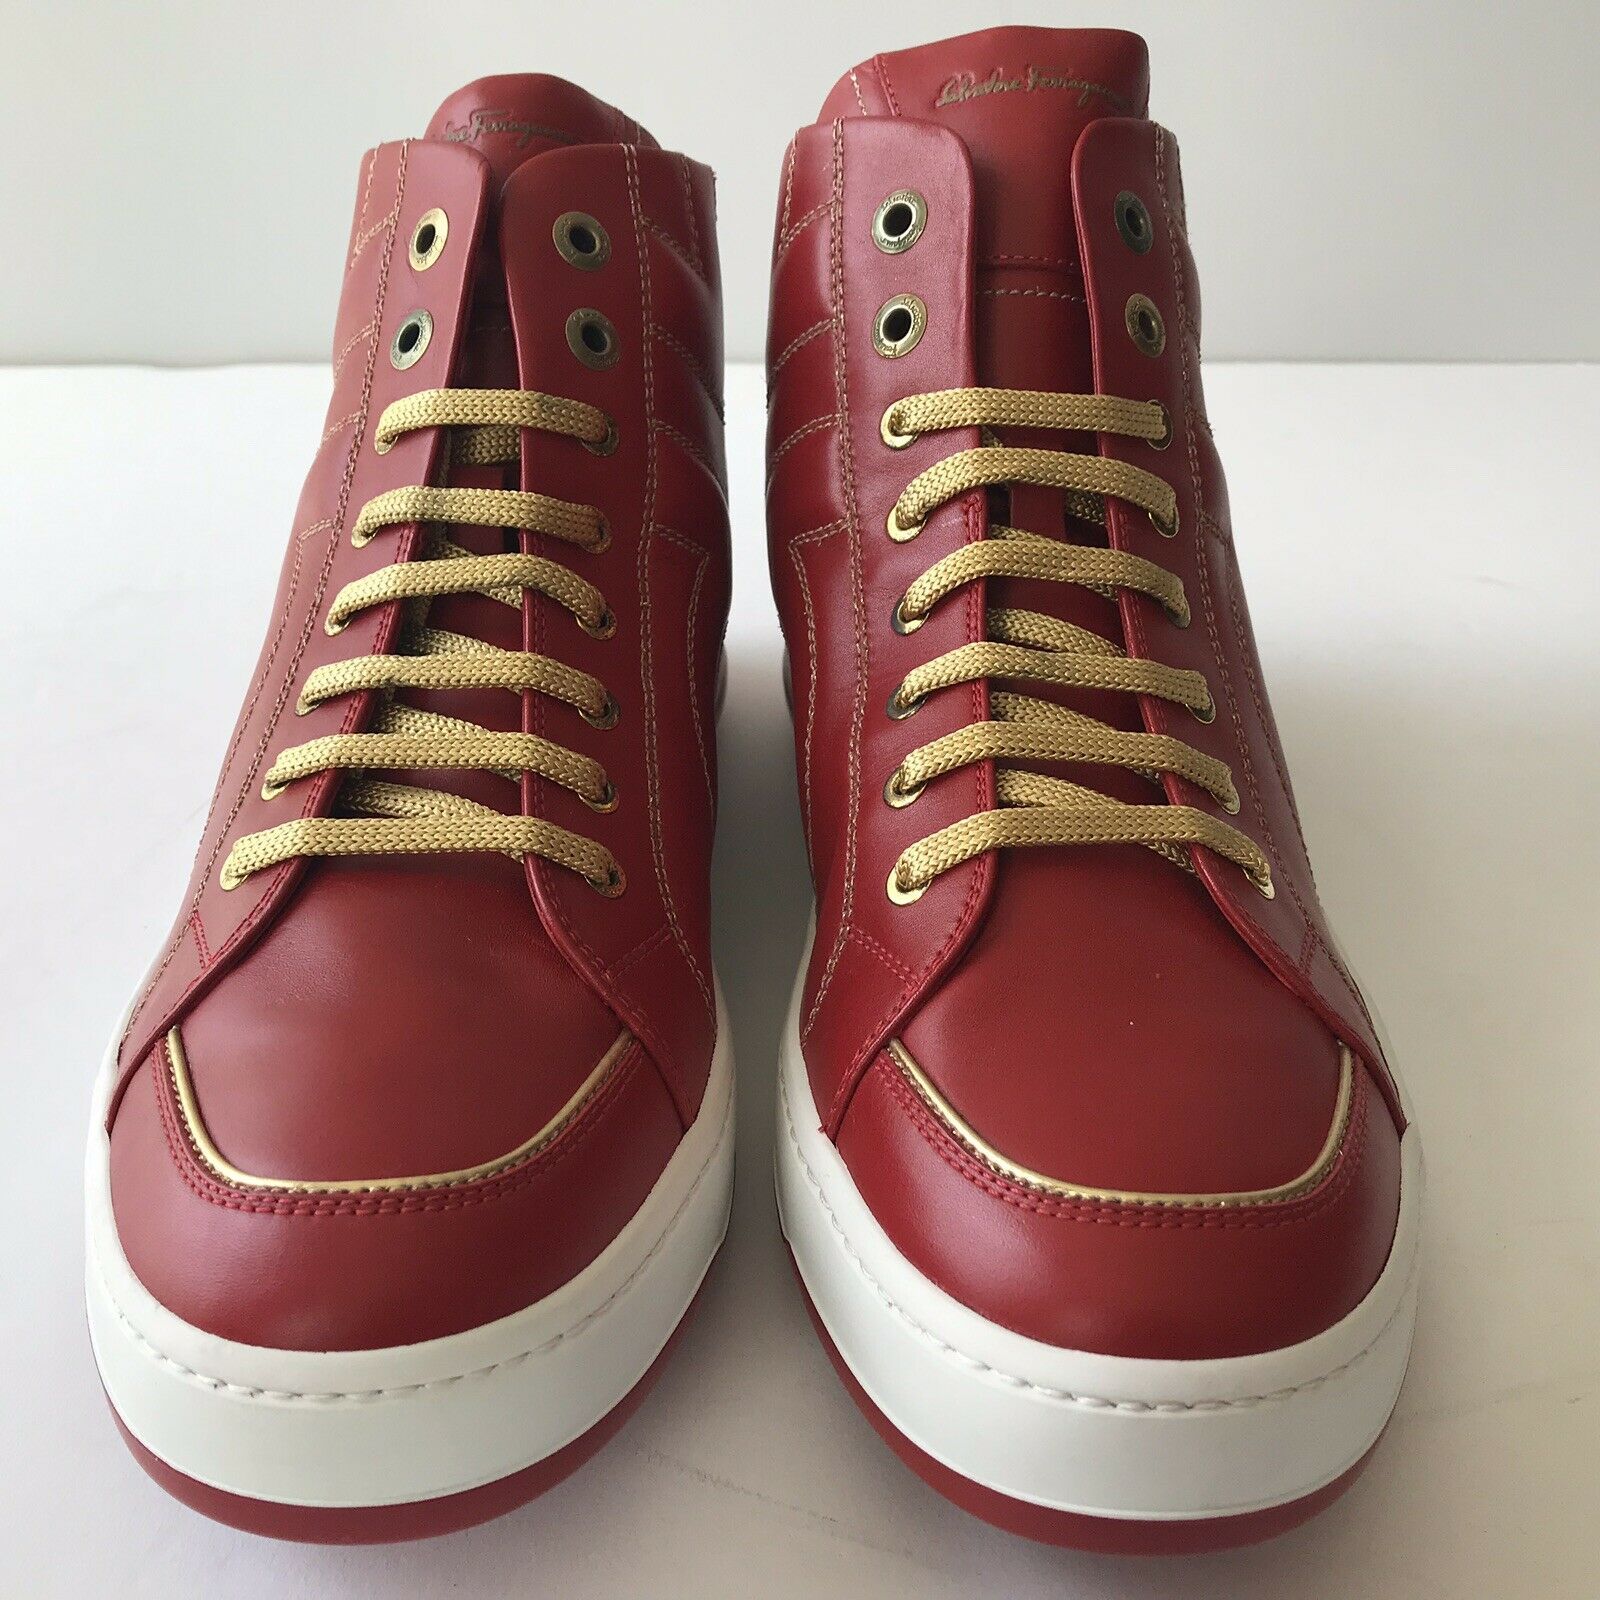 W-2105218 New Salvatore Ferragamo Nicky Red Leather Sneaker Shoes Size ...